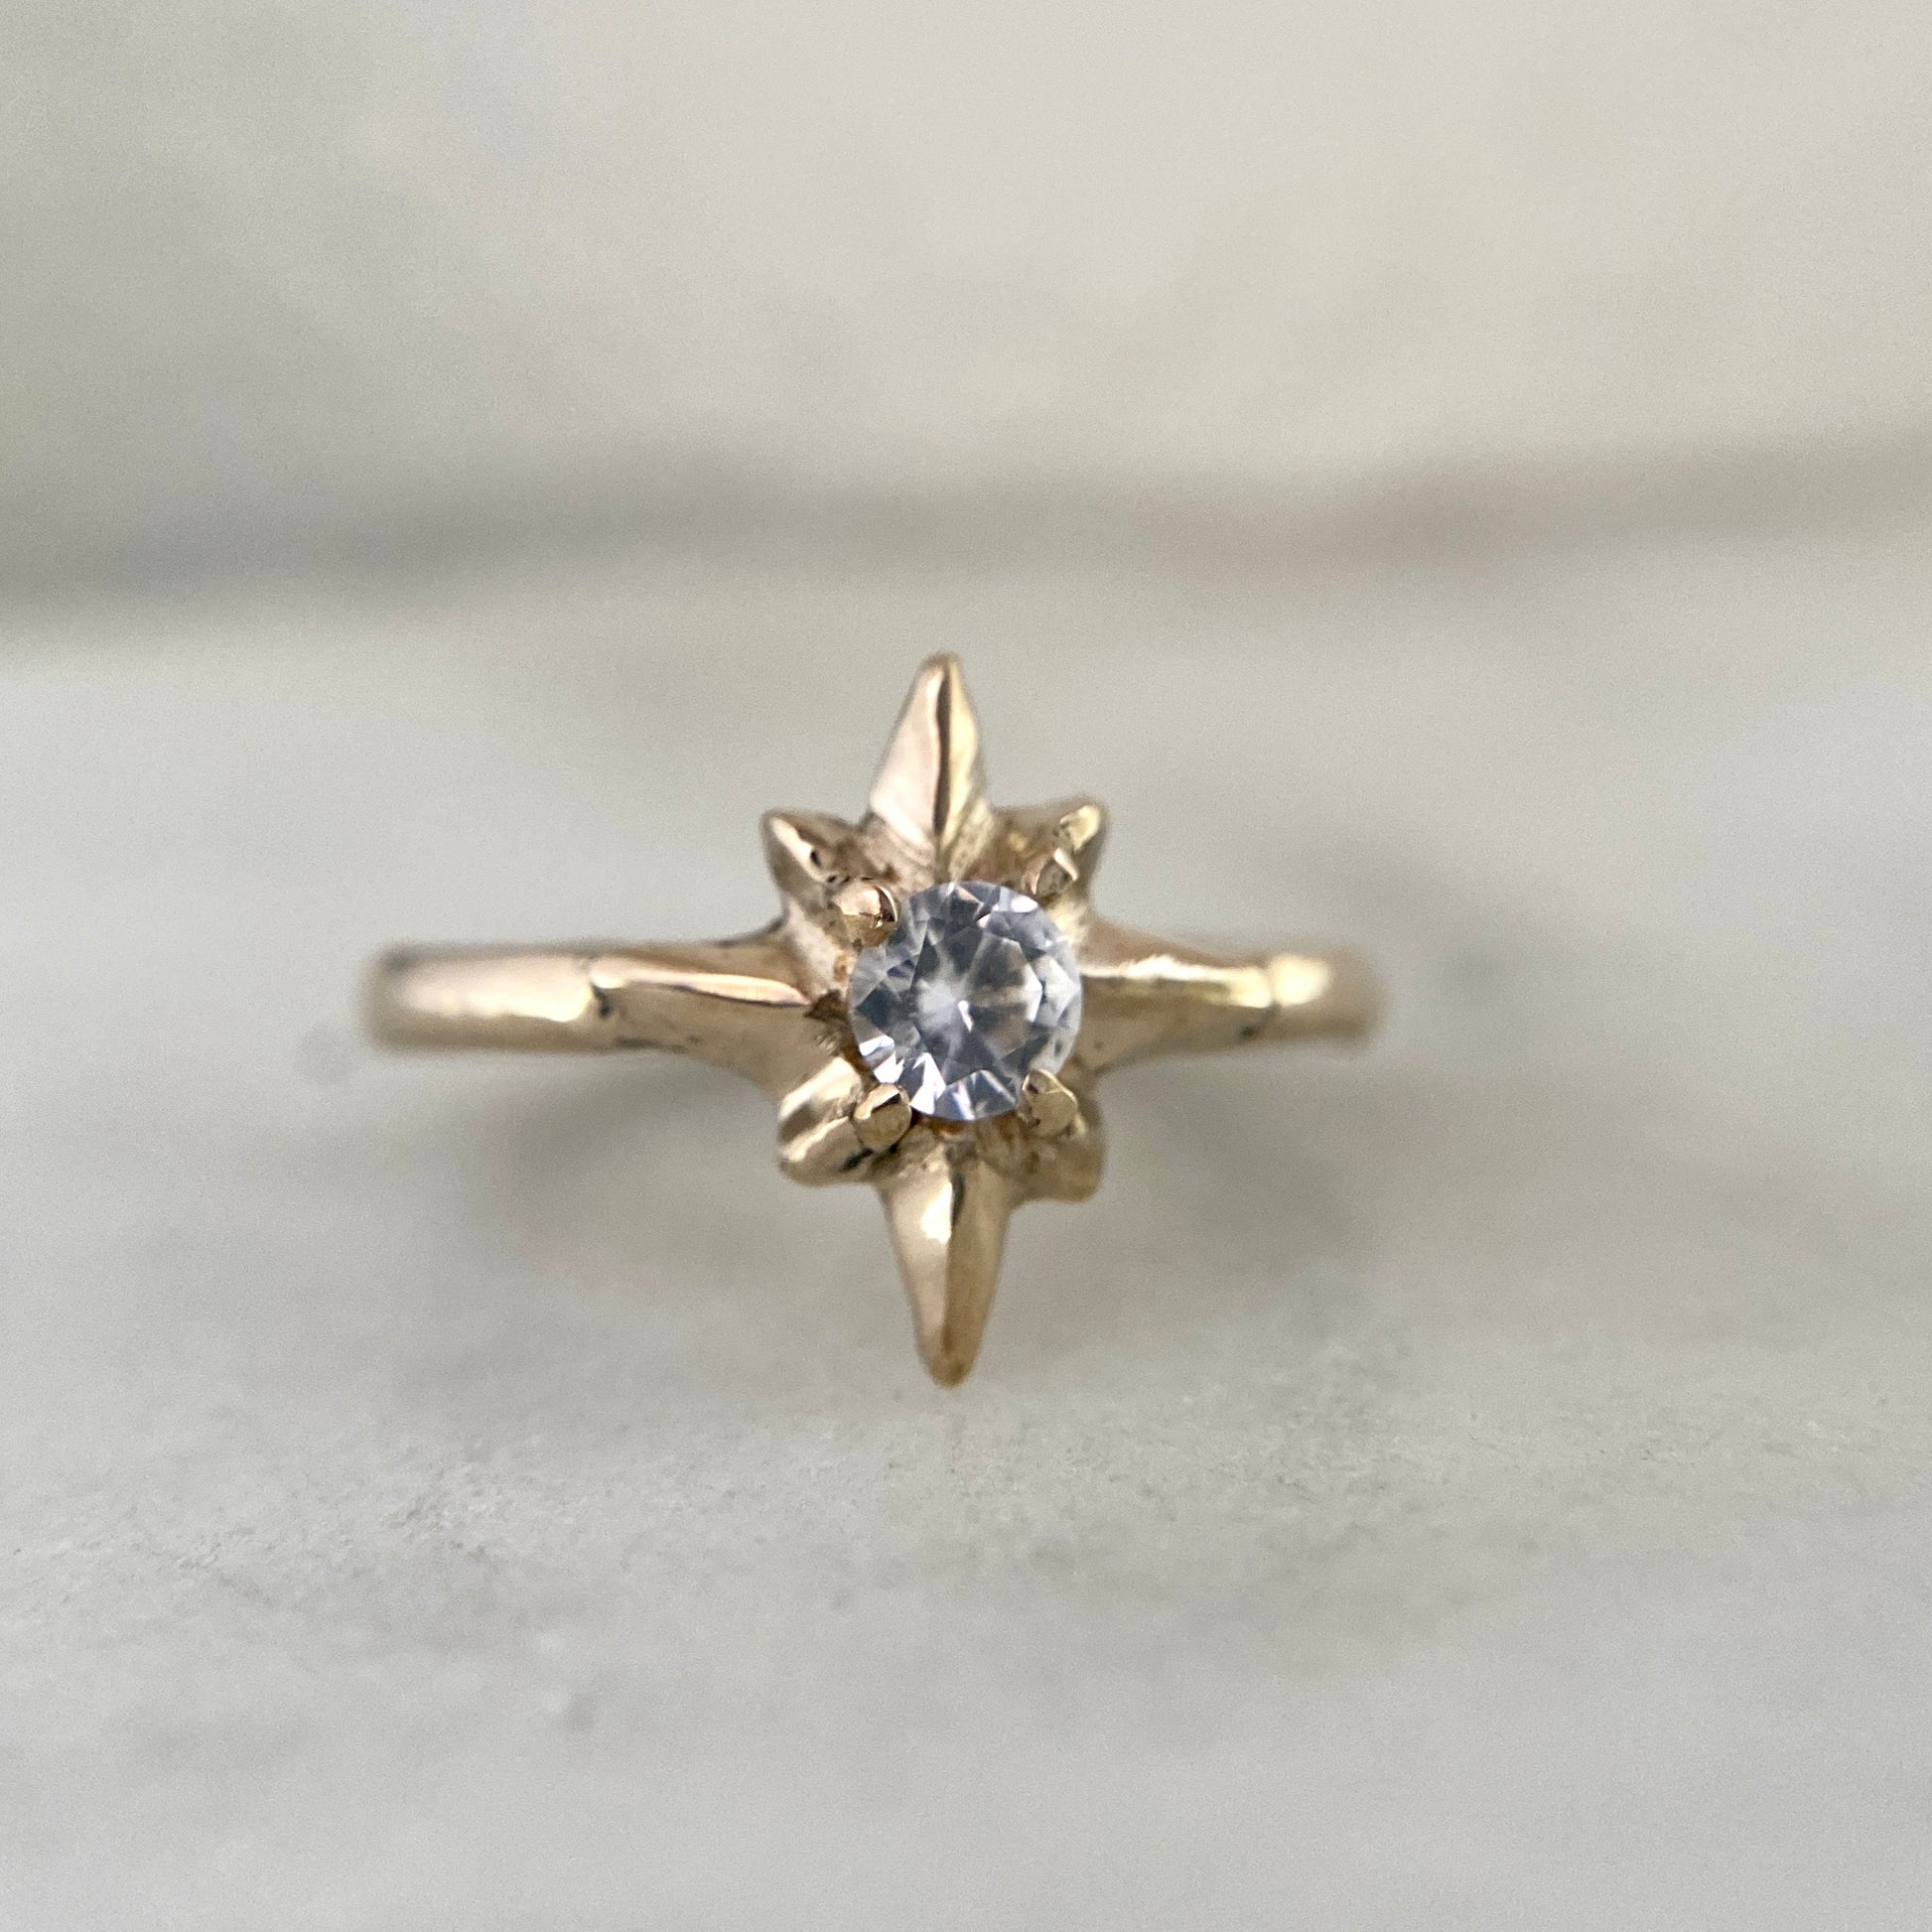 Polaris North Star Ring cast in gold tone bronze set with a clear Cubic Zirconia, by Iron Oxide Designs